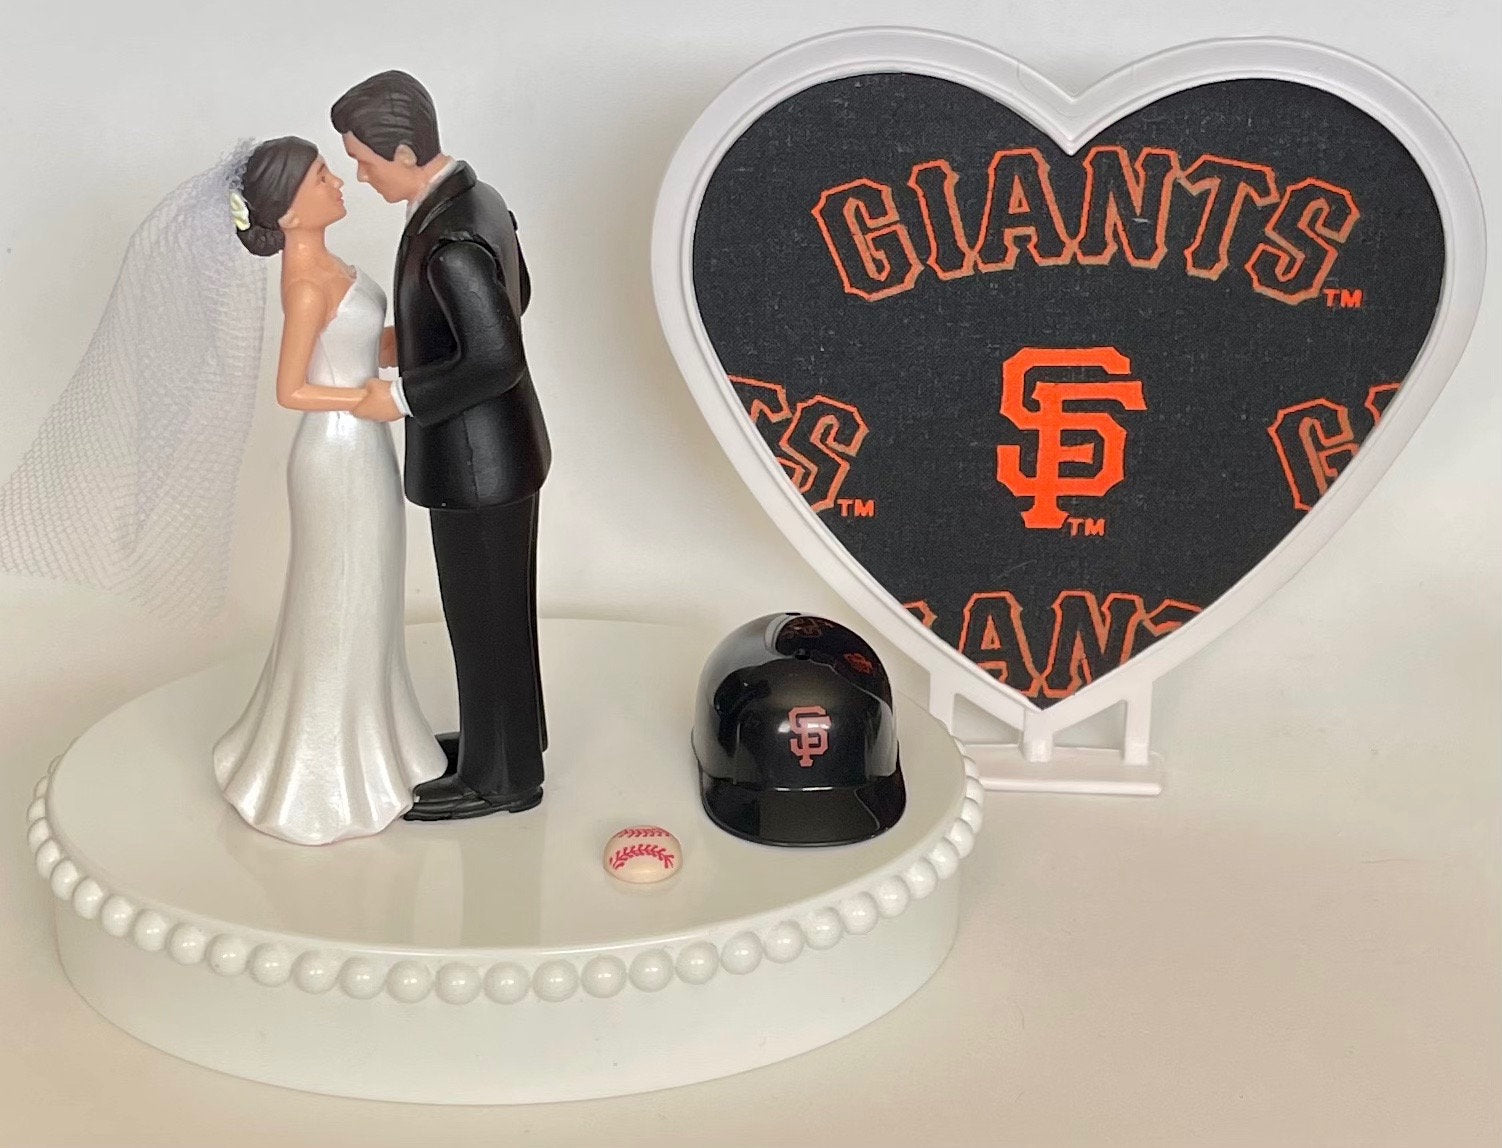 Wedding Cake Topper San Francisco Giants Baseball Themed Short-Haired Bride Groom Pretty Heart Sports Fans Fun Unique Shower Reception Gift